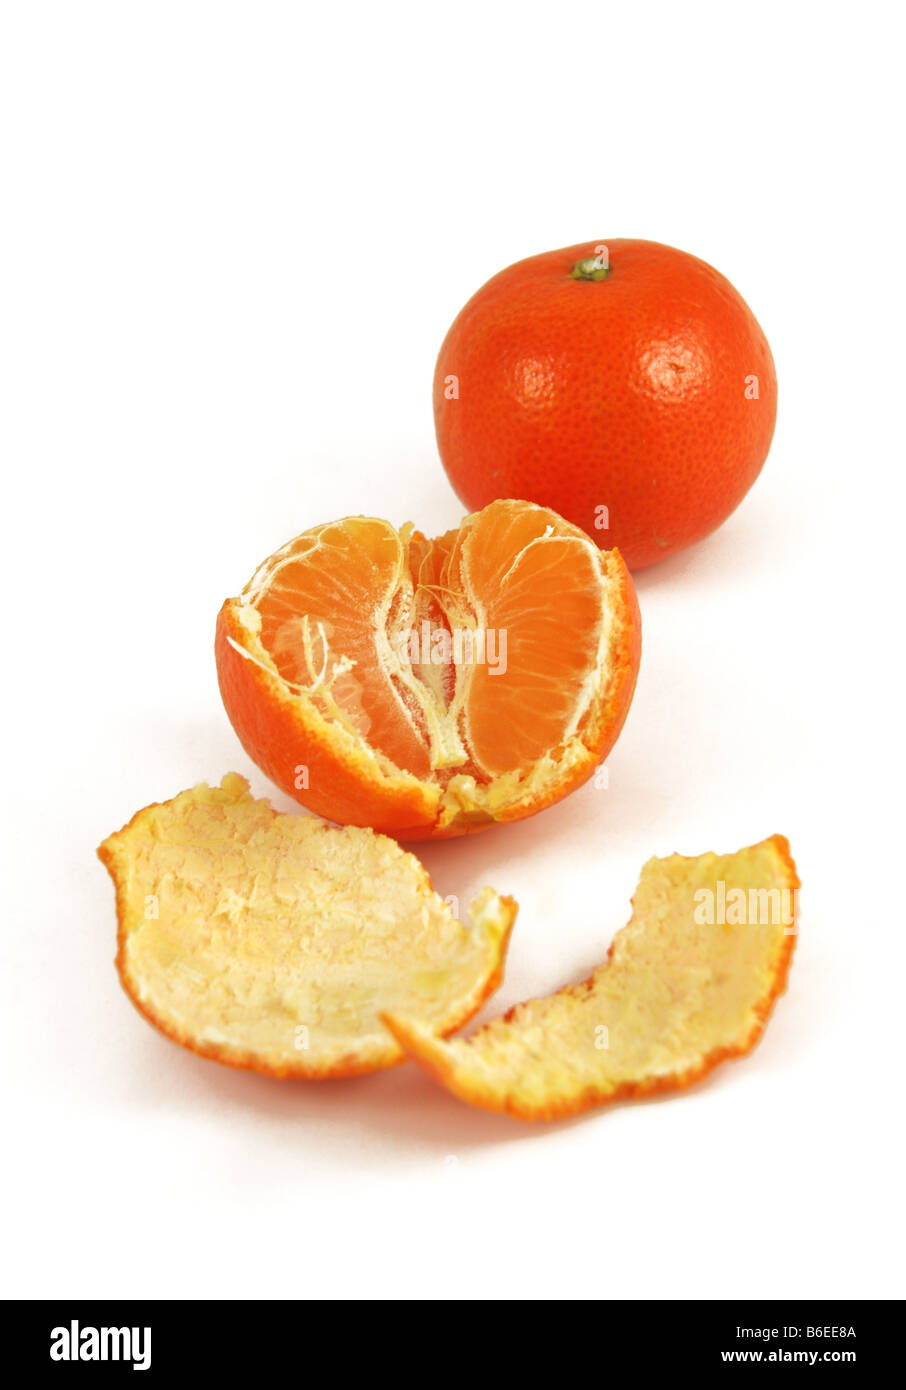 A half peeled orange sits in front of an unpeeled one. Stock Photo